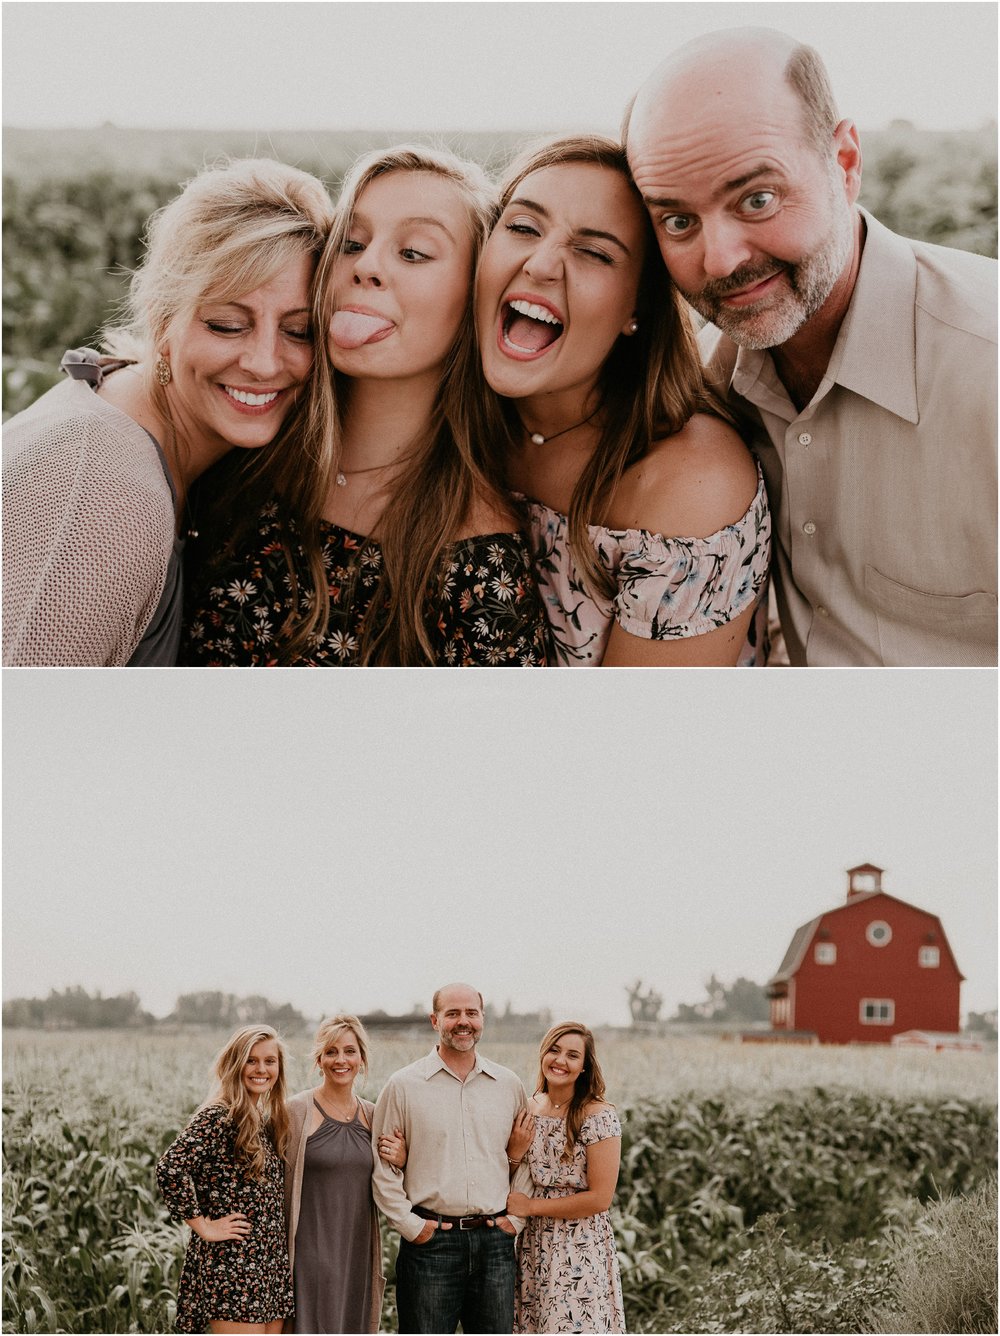 Boise Senior Photographer Idaho Summer Family Pictures Silly Goofy Faces Posing Cornfield Linder Farms Makayla Madden Photography 